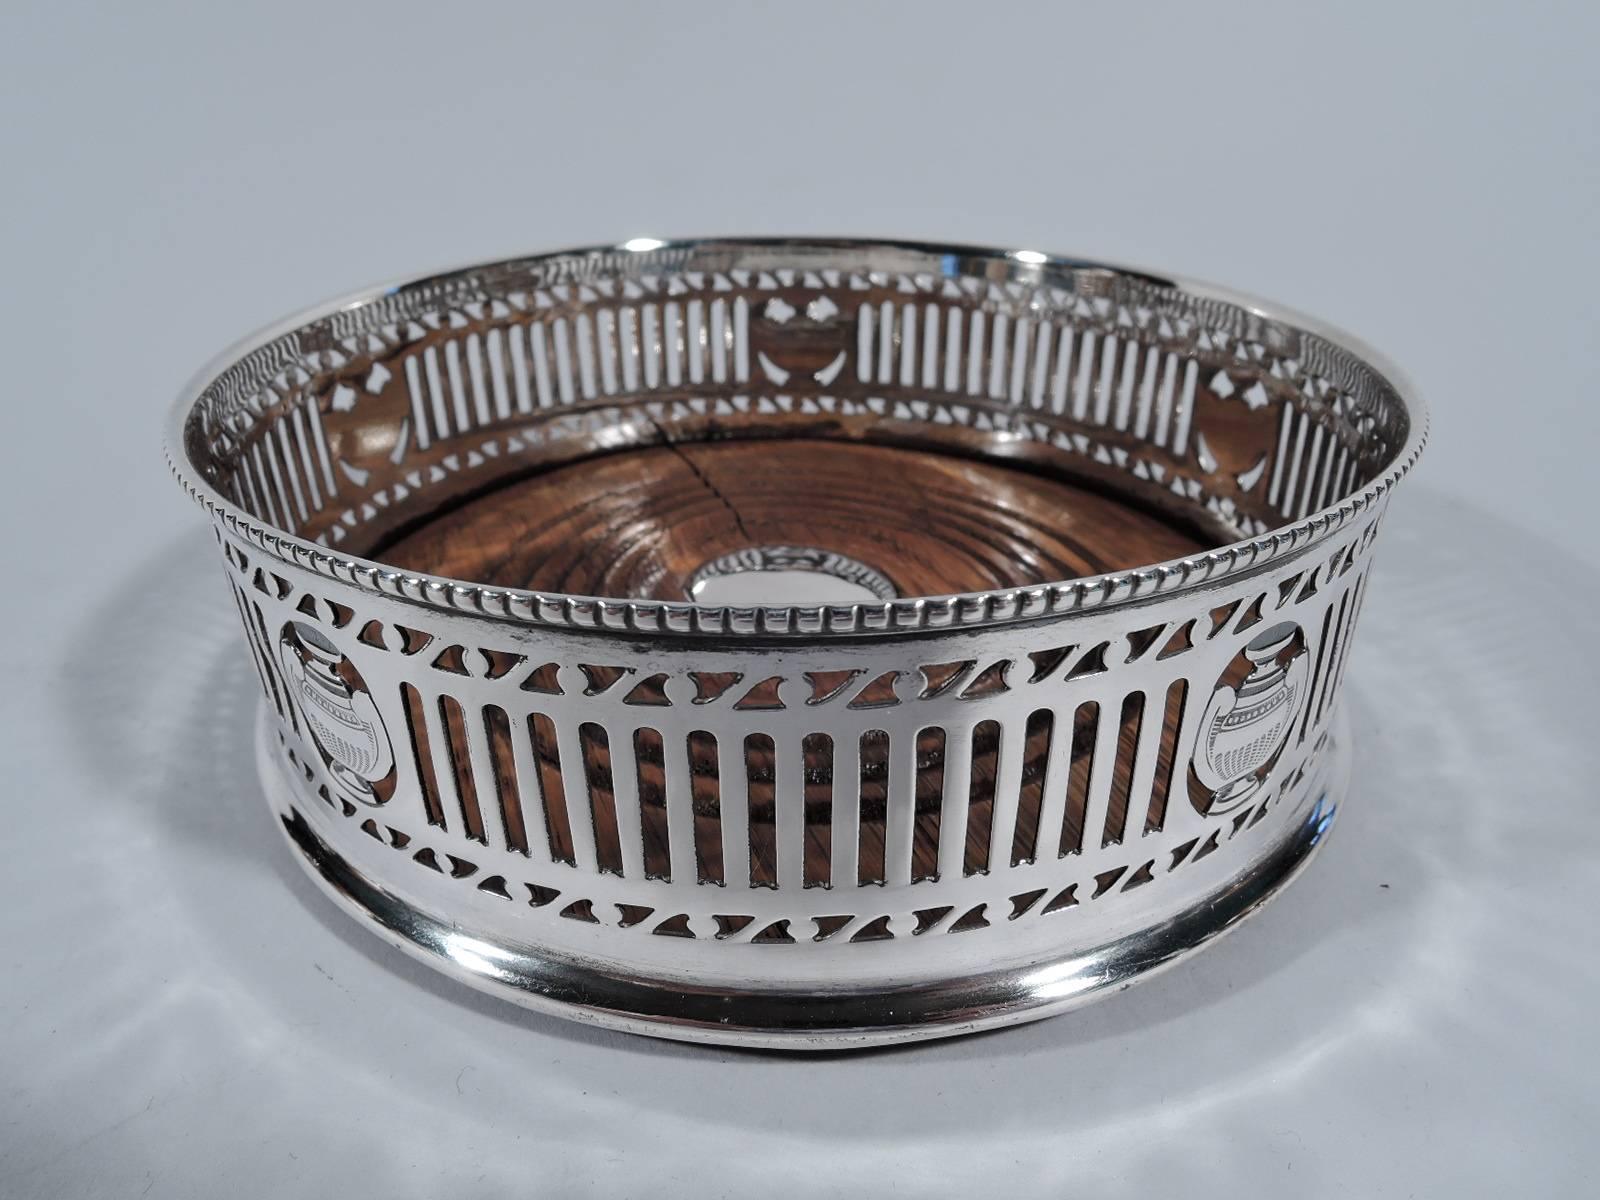 George V sterling silver wine bottle coaster. Made by Harry Freeman in London 1912. Pierced lines and rinceaux, open ovals inset with amphorae, and beaded rim. Stained and felt-lined wood well. Hallmarked.